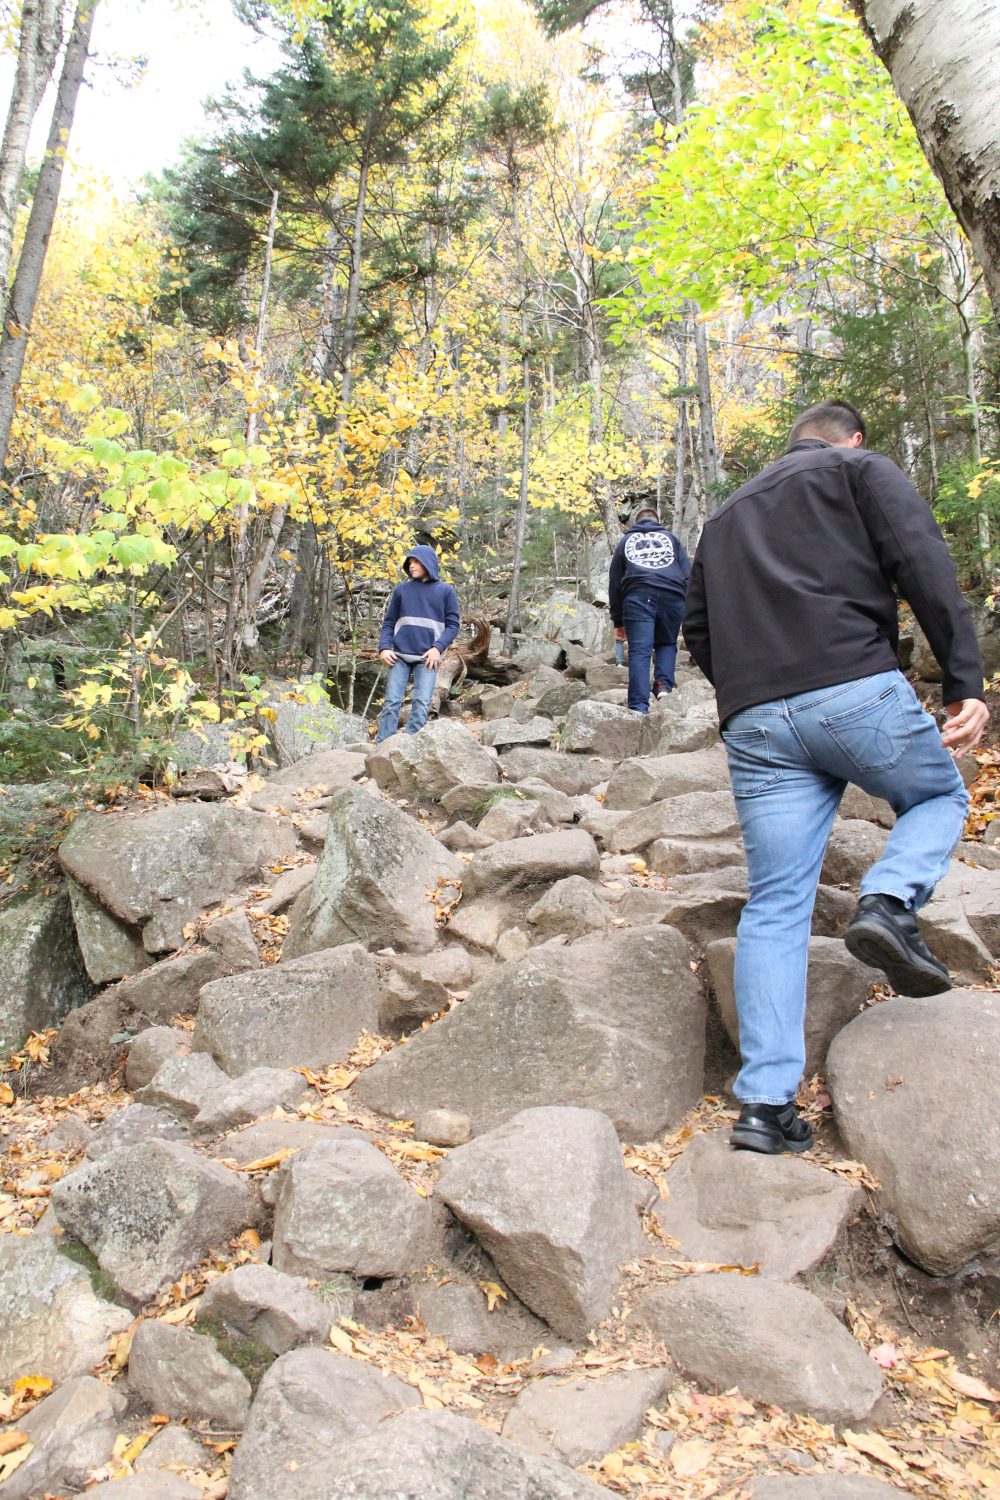 Hiking the trail, climing big boulders, to Artist's Bluff in Franconia Notch State Park.